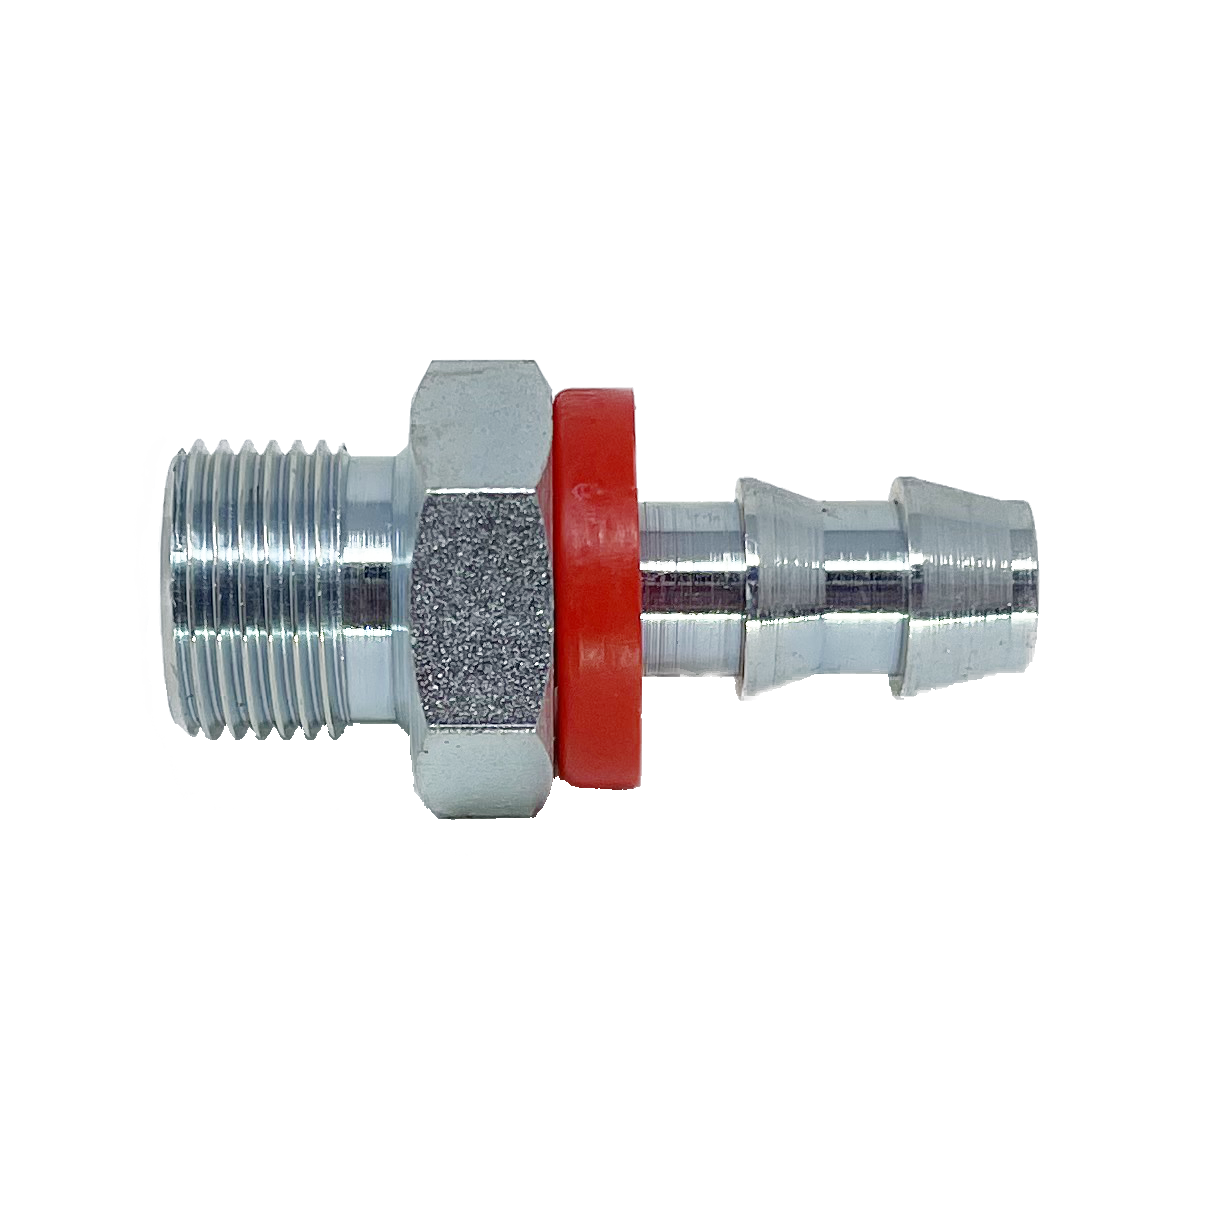 9920-06-06 : Adaptall Straight Adapter, Male 0.375 (3/8") BSPP x 0.375 (3/8") Hose Barb, Carbon Steel